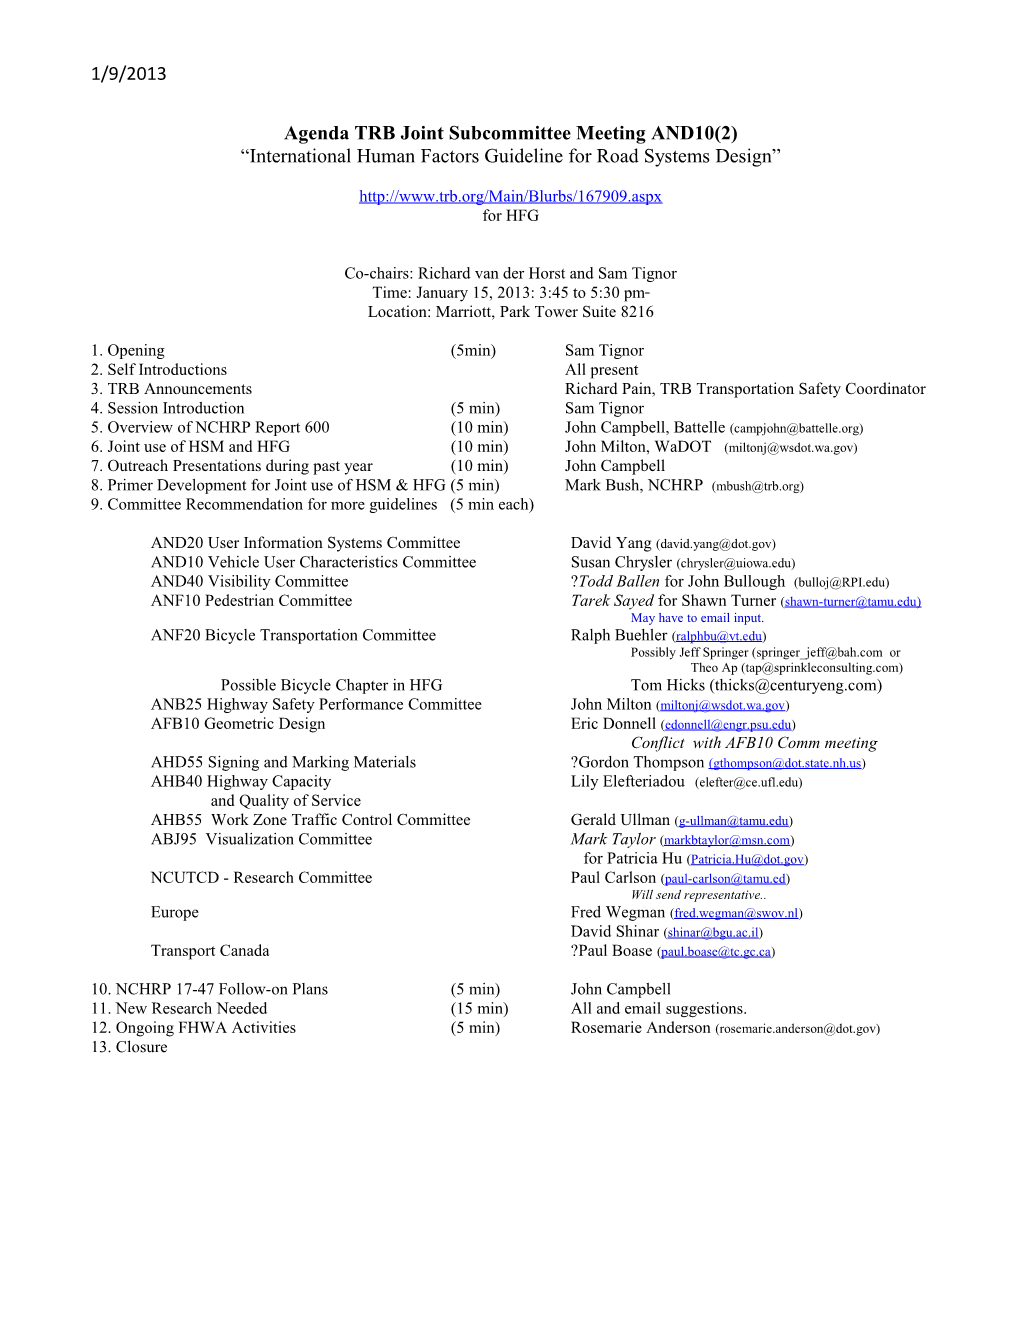 Agenda TRB Joint Subcommittee Meeting AND10(2)